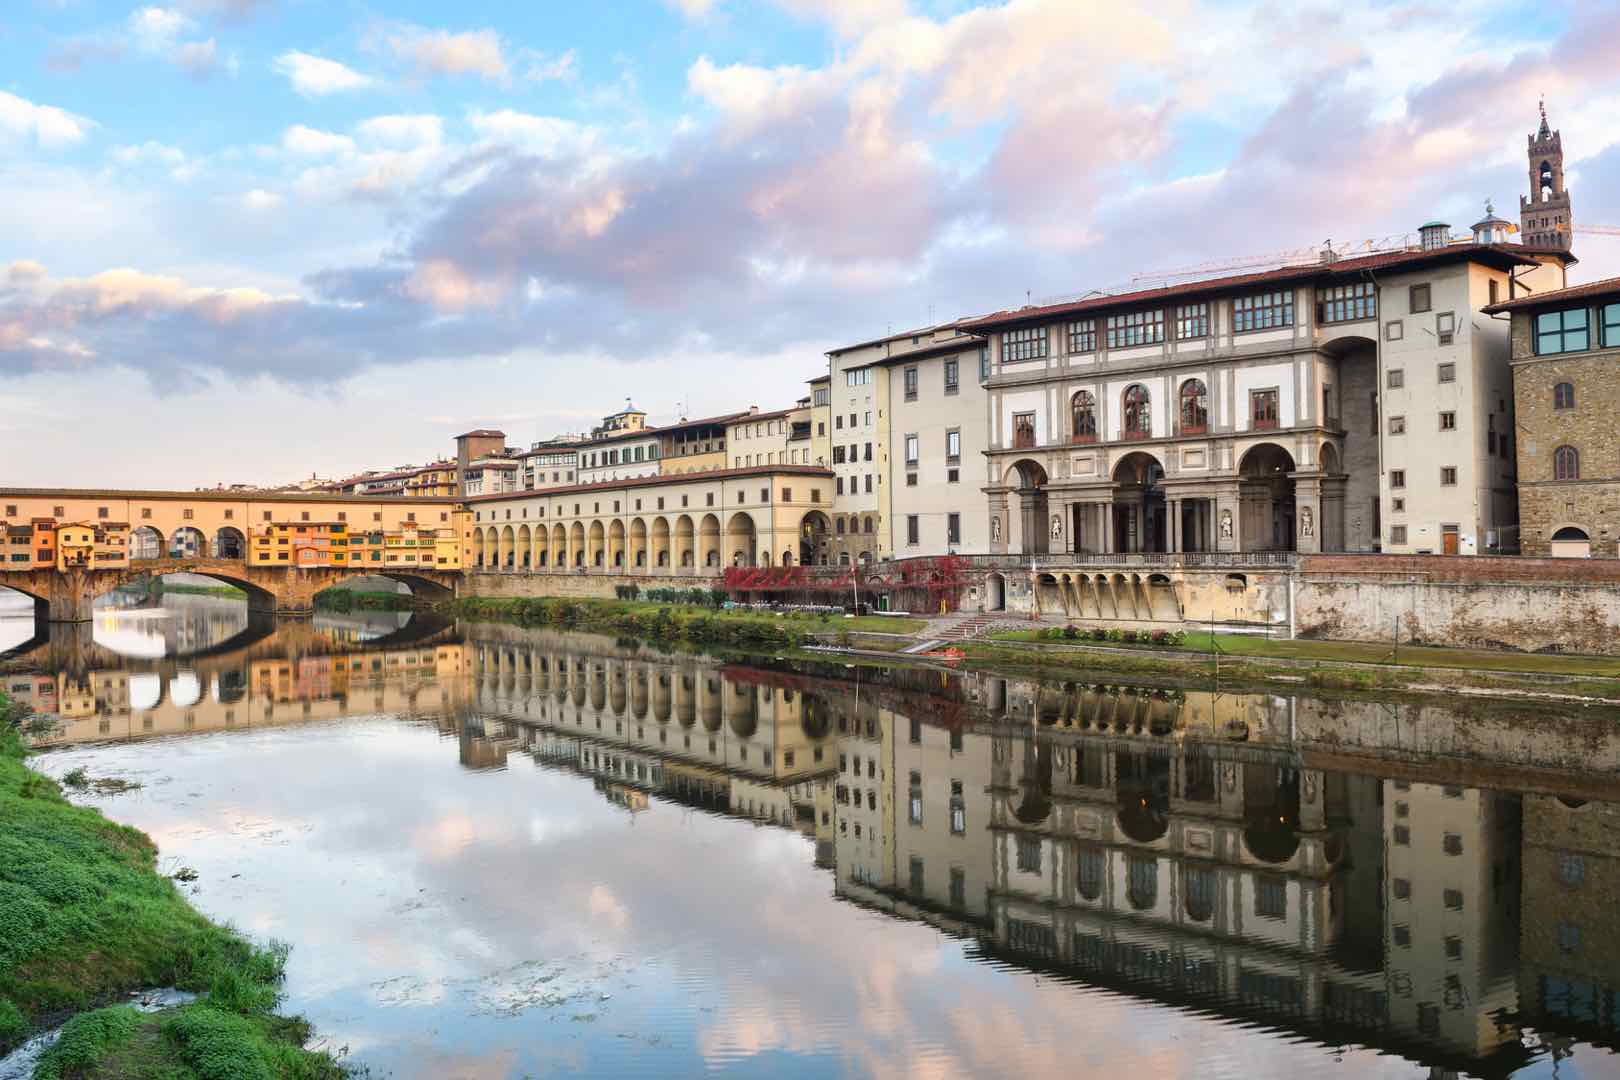 5 Books to Read Before Visiting Italy by Italy Perfect Florence Uffizi Gallery